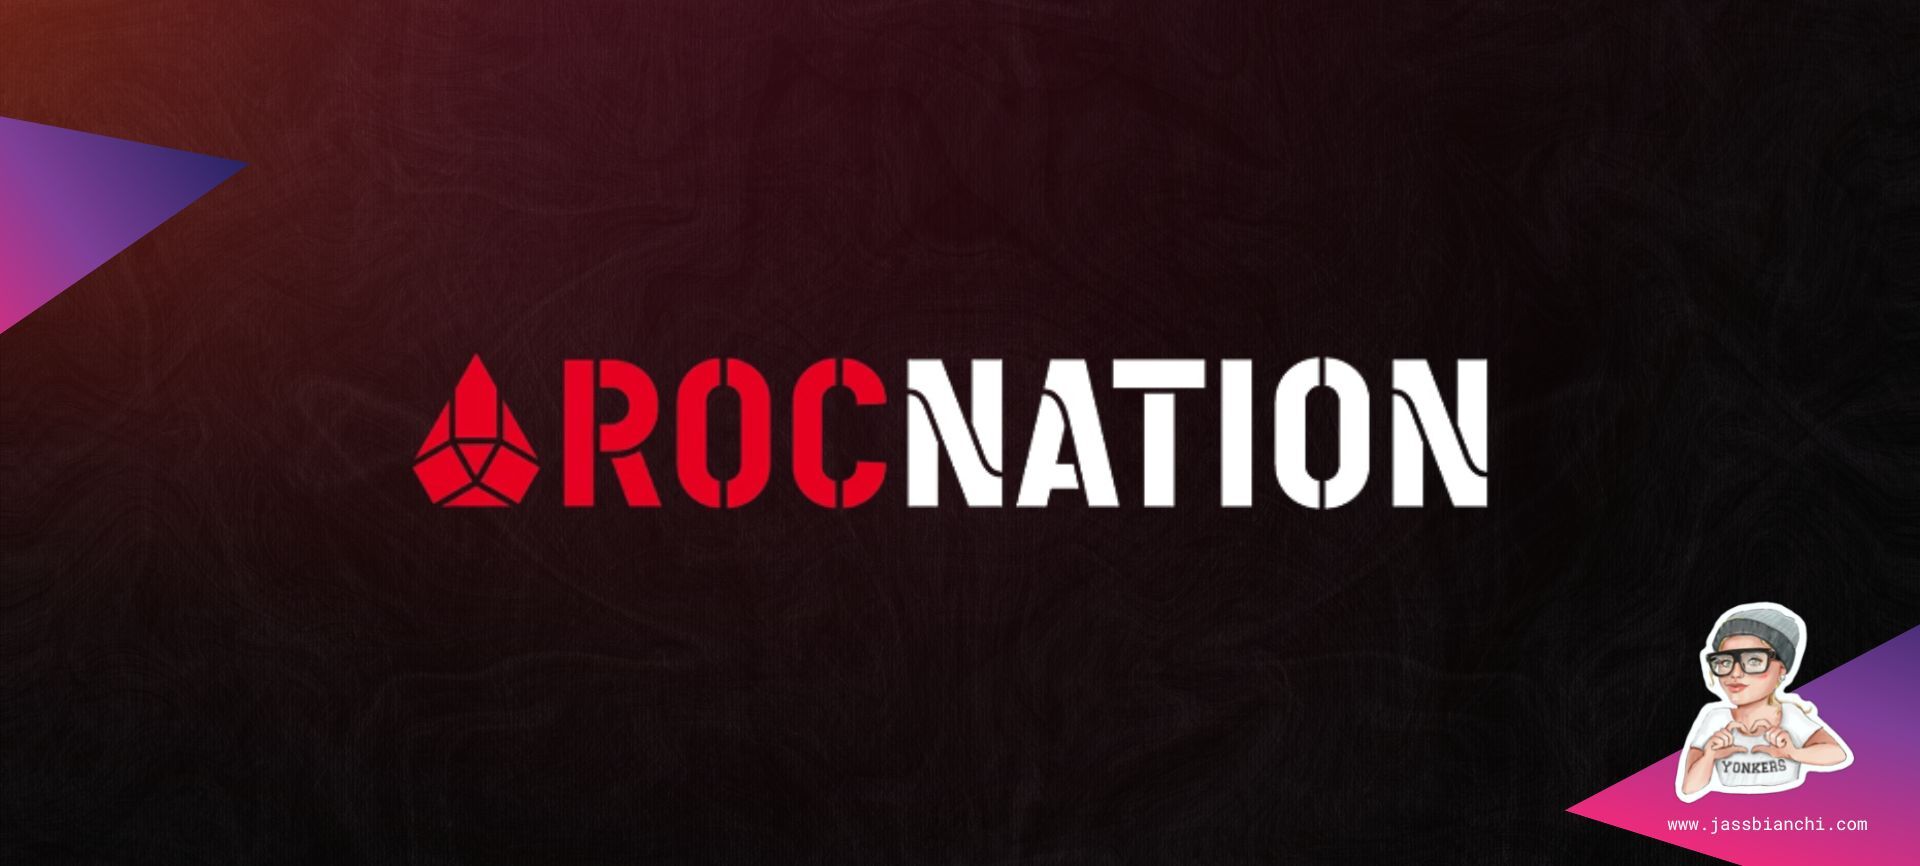 Roc Nation is a full-service entertainment company